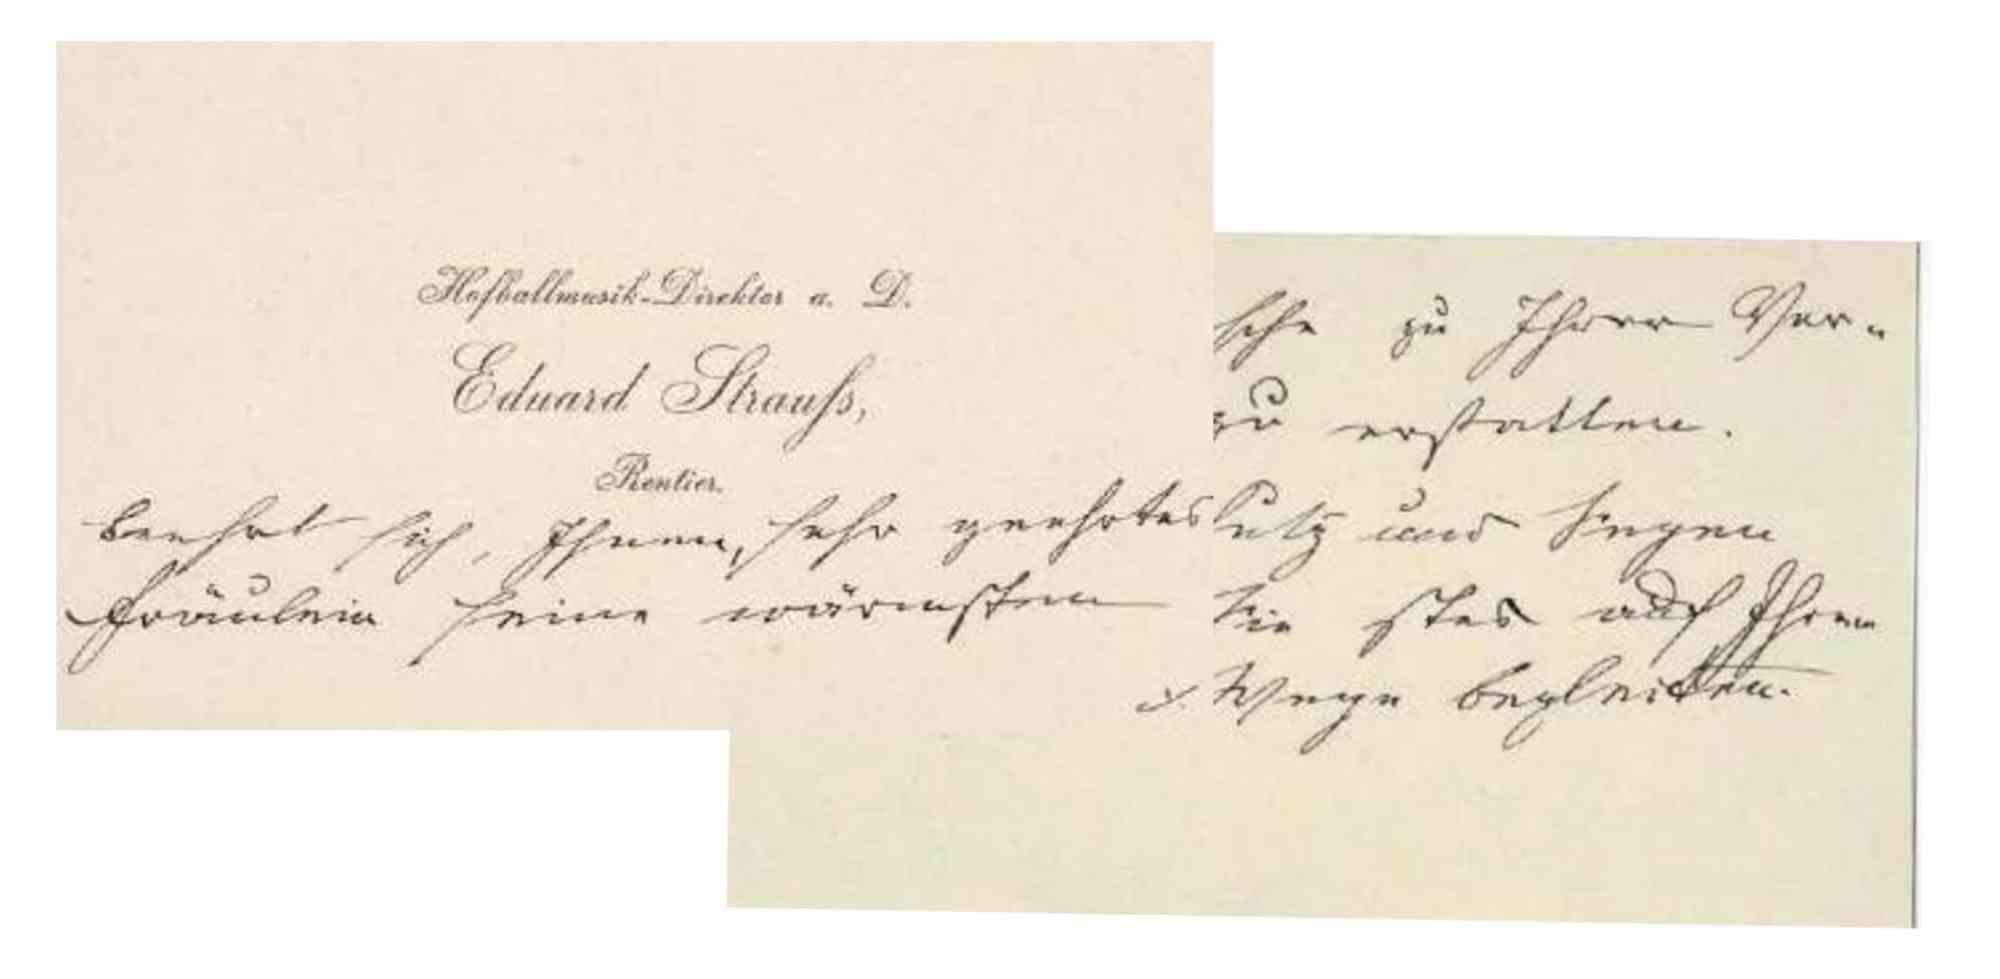 Autograph Letter by Eduard Strauss - Early 20th Century